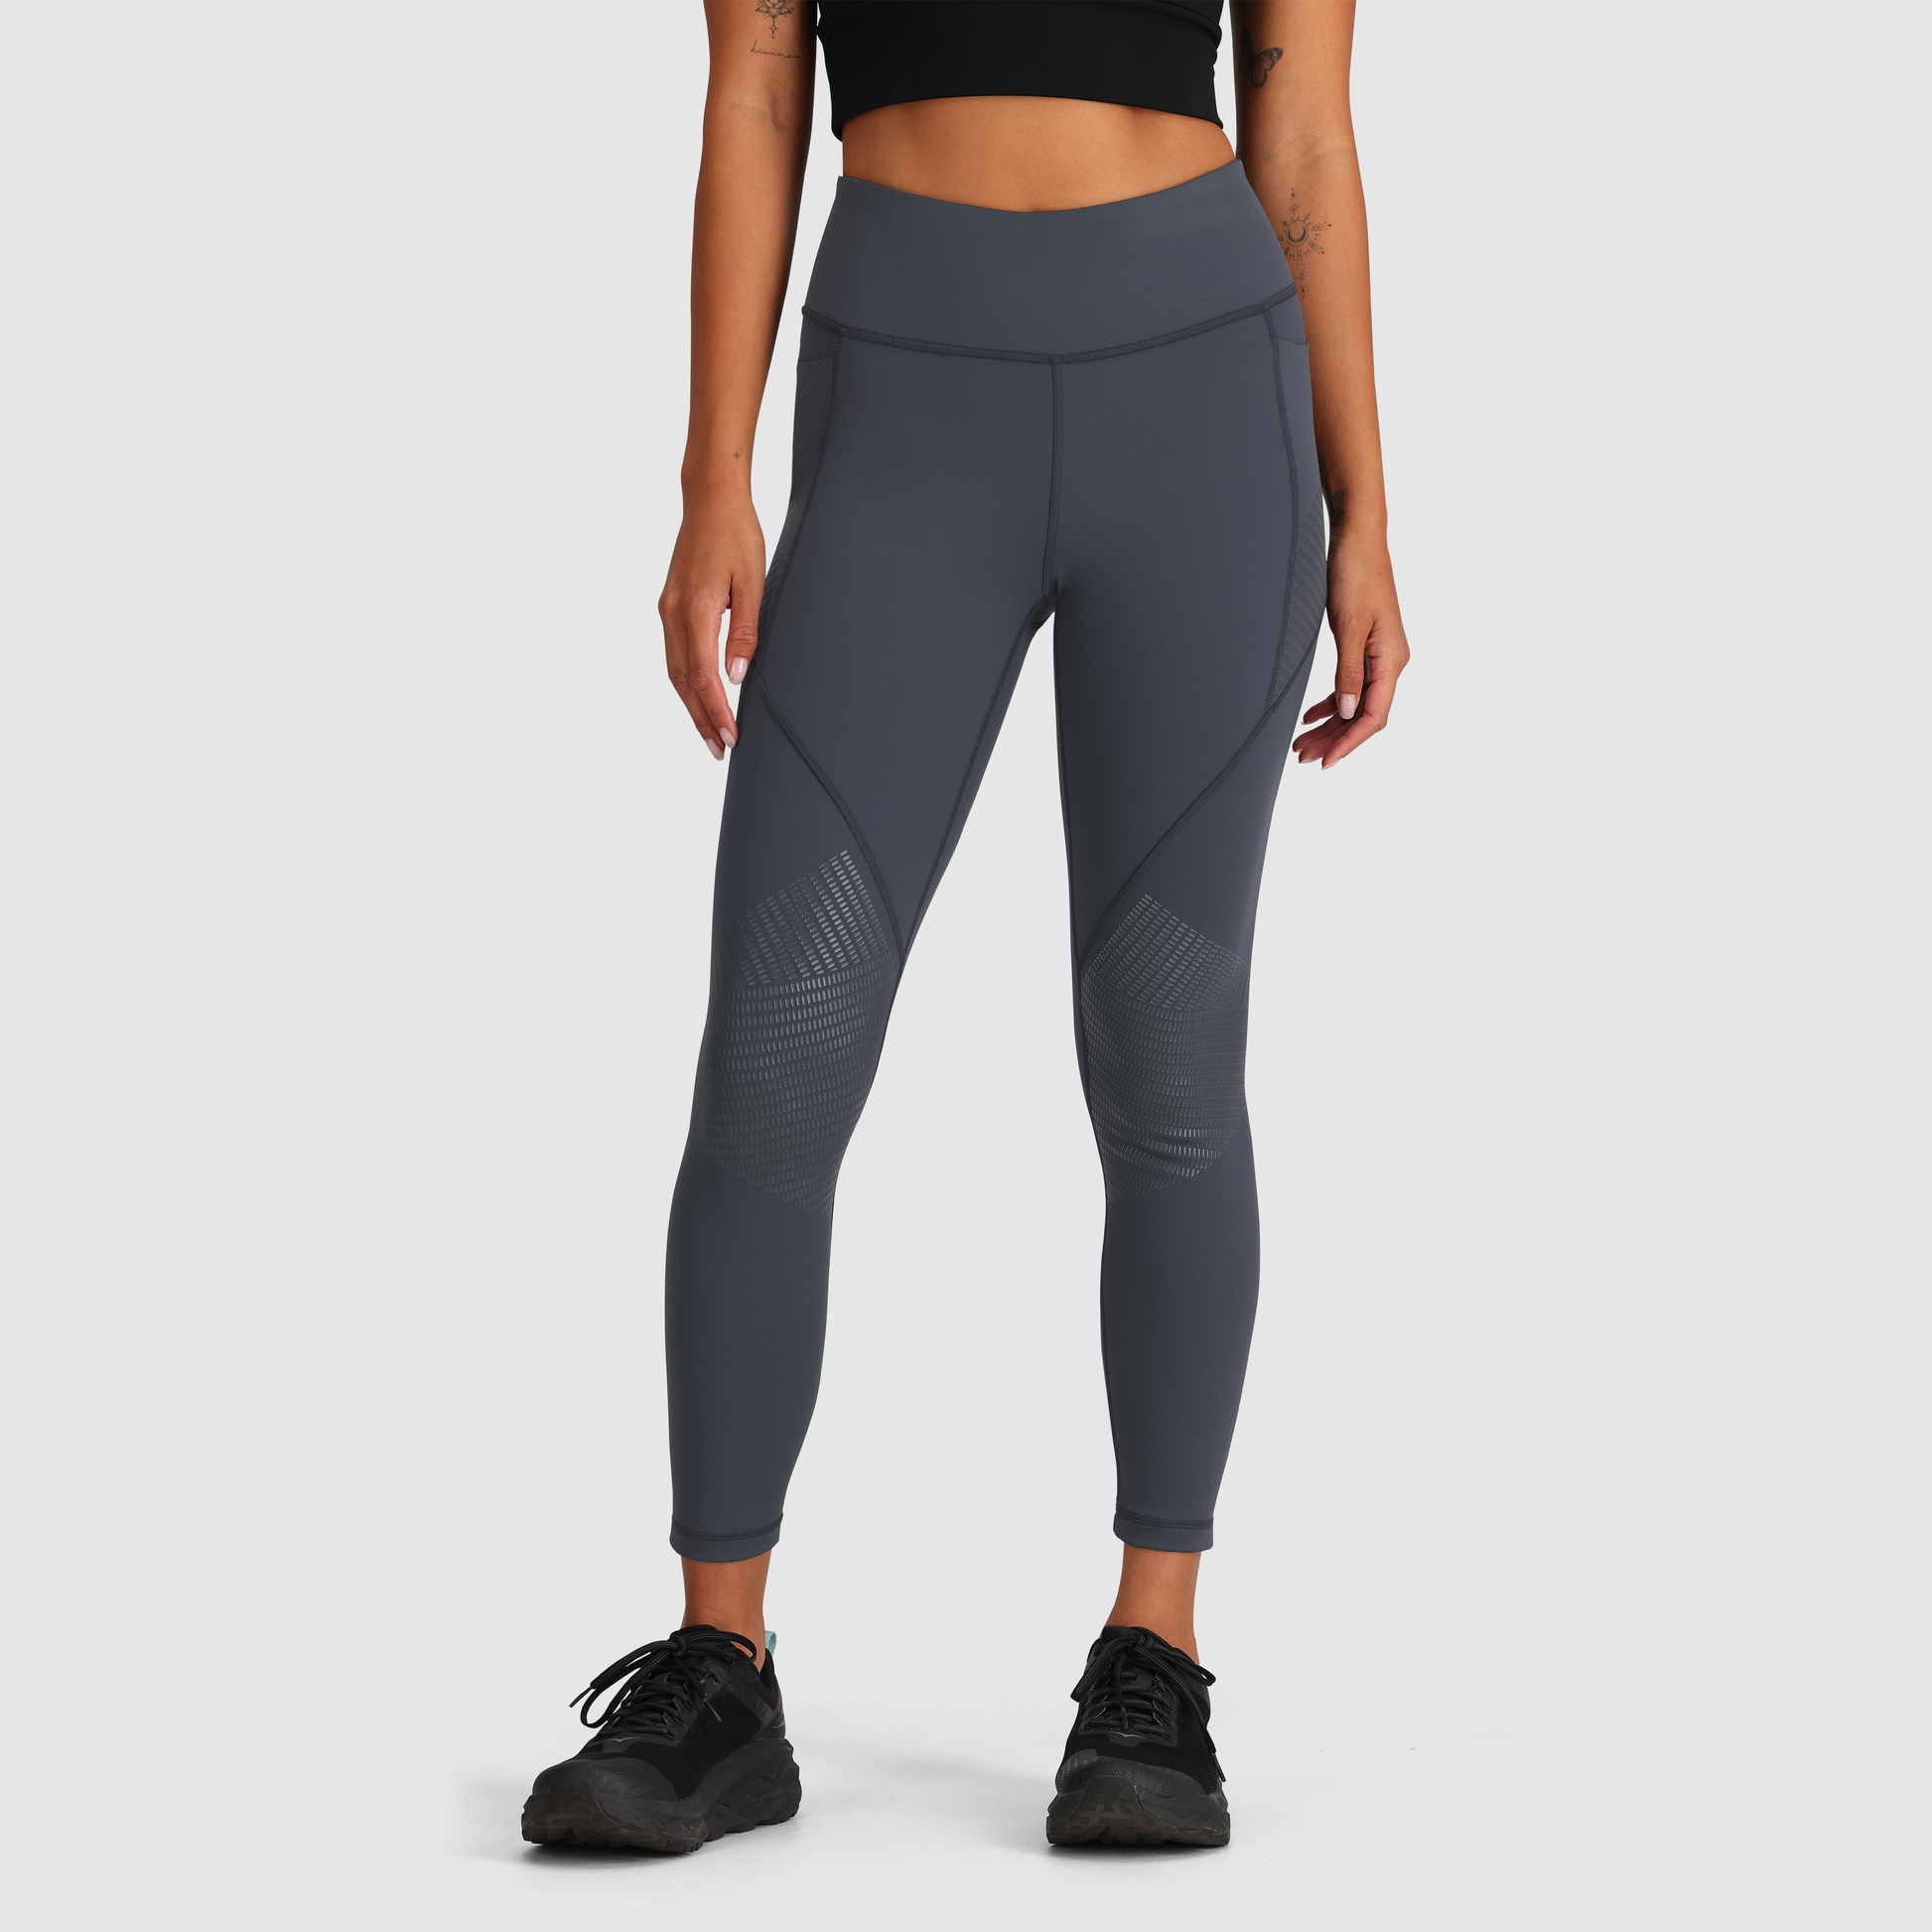 Nike Pro Dri-FIT womens black 7/8 Legging pants Size small stretch  compression for sale online